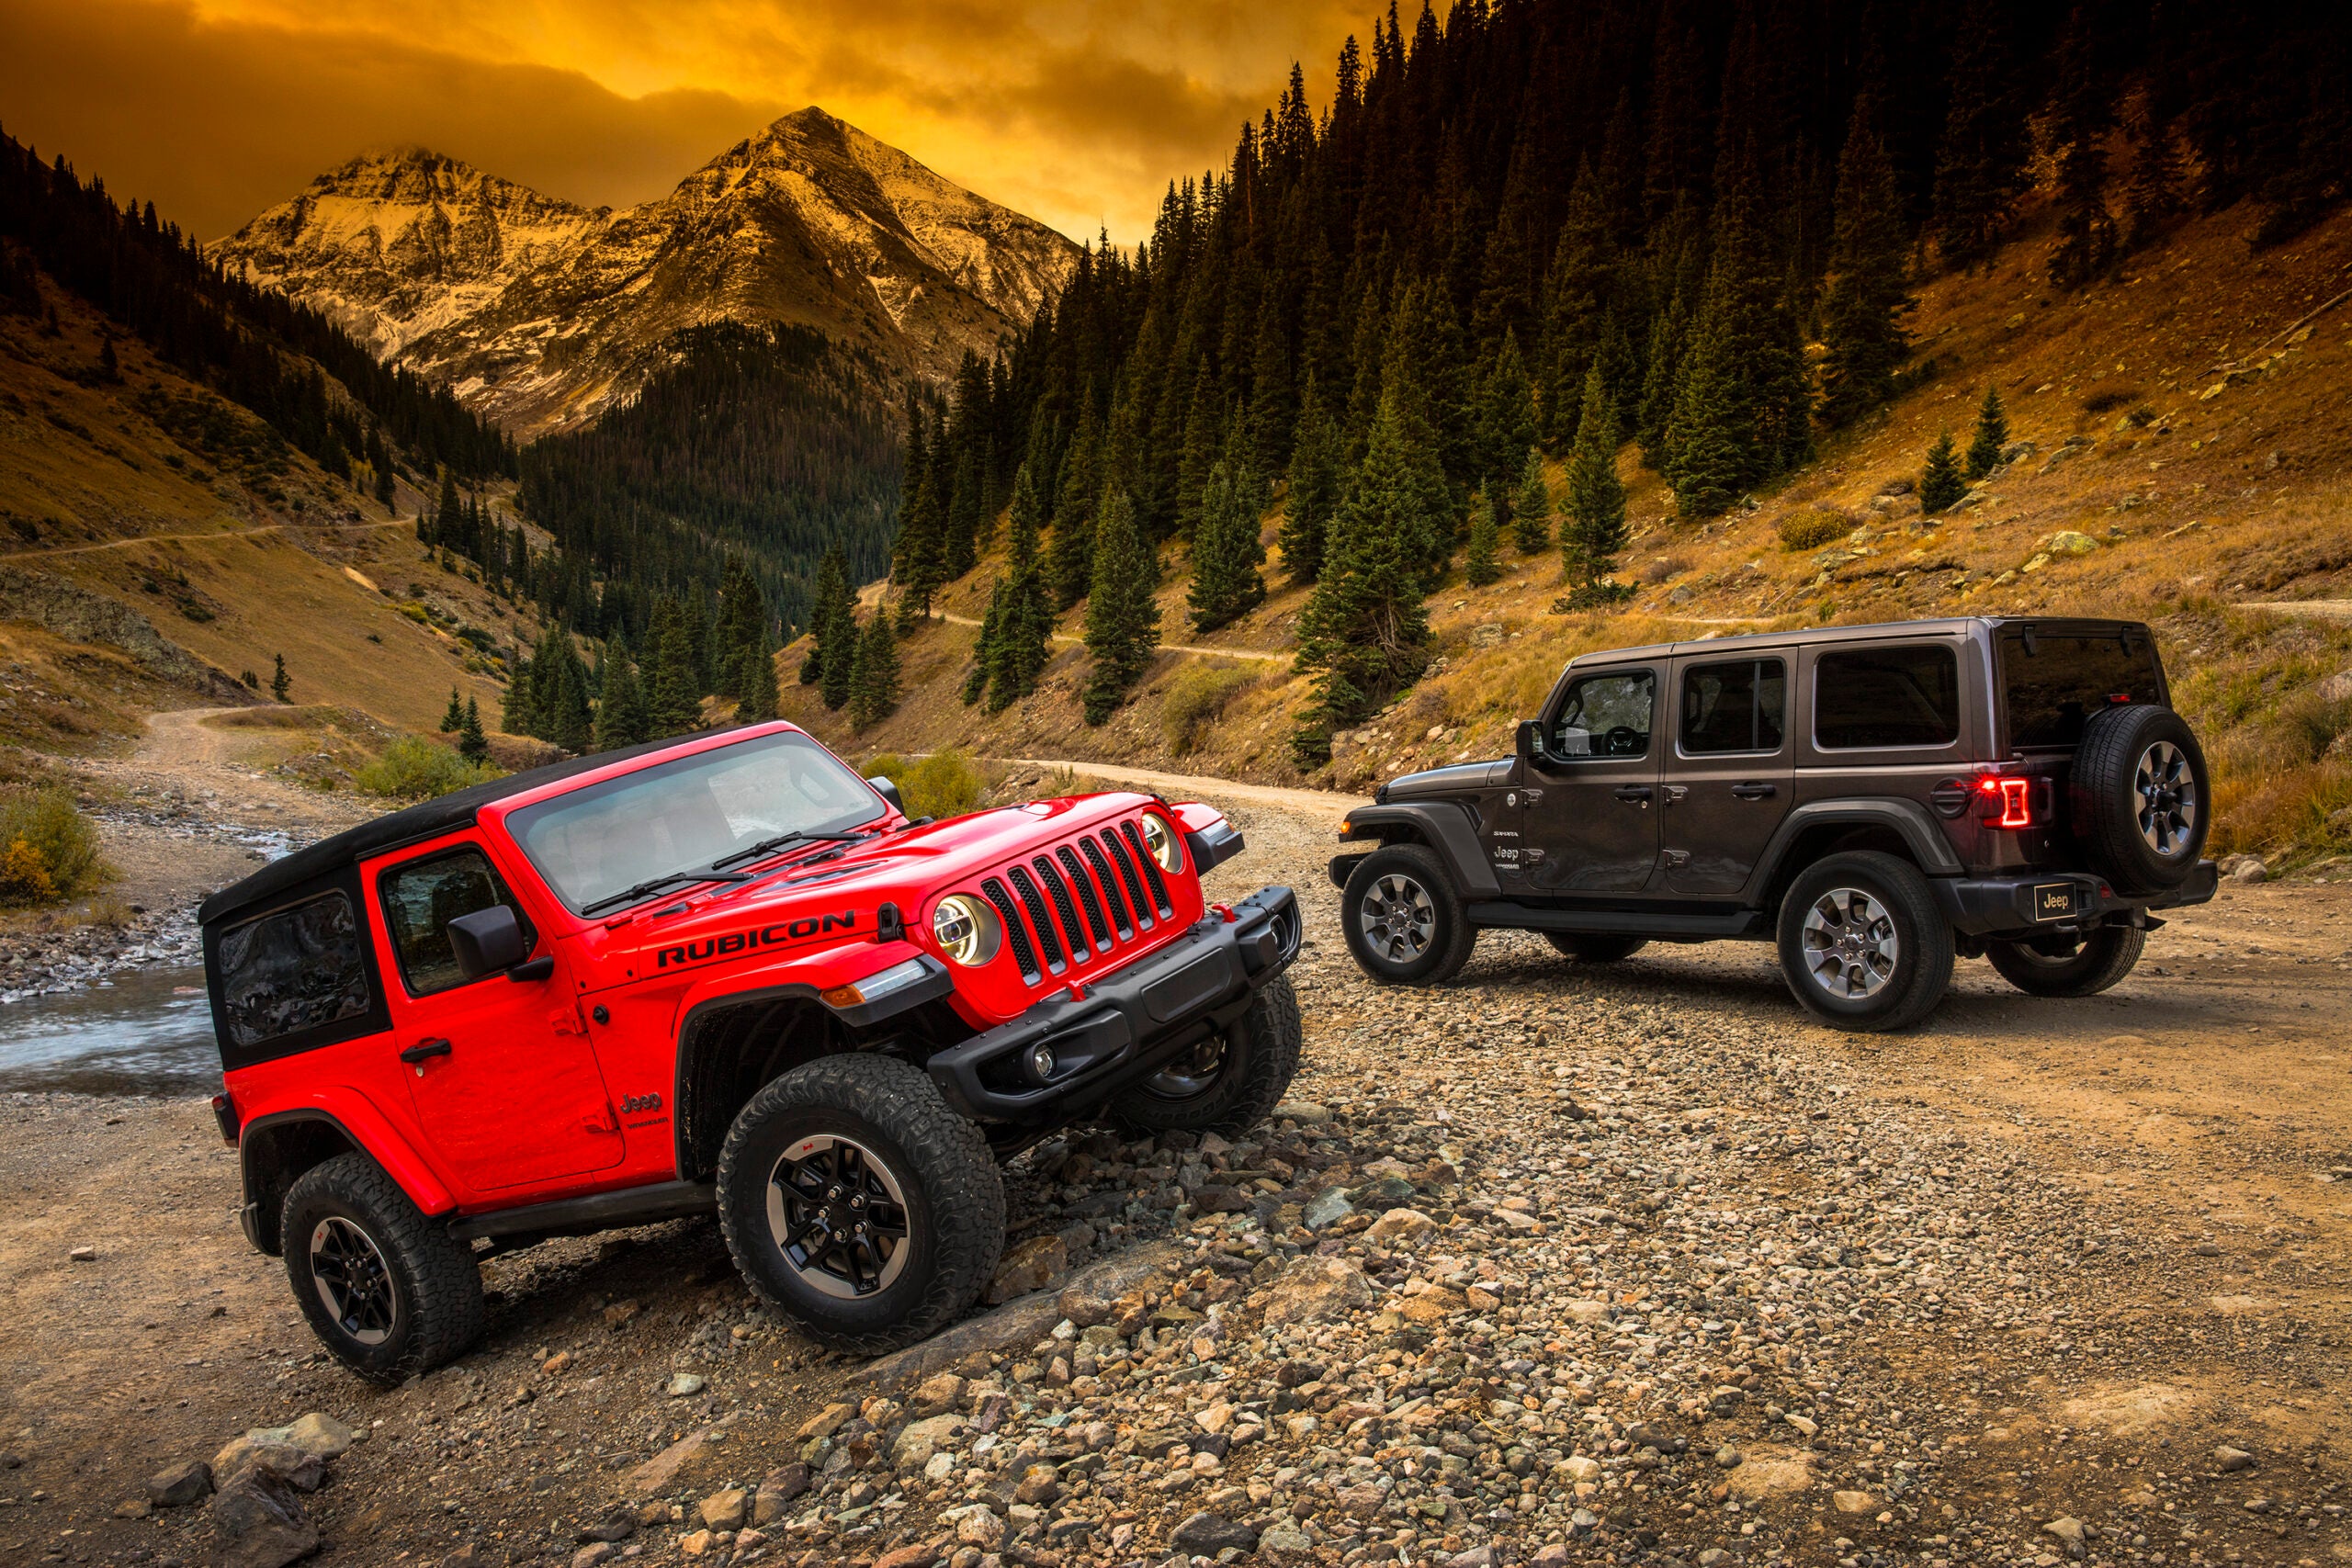 All-new 2018 Jeep Wrangler debuts at the Los Angeles Auto Show